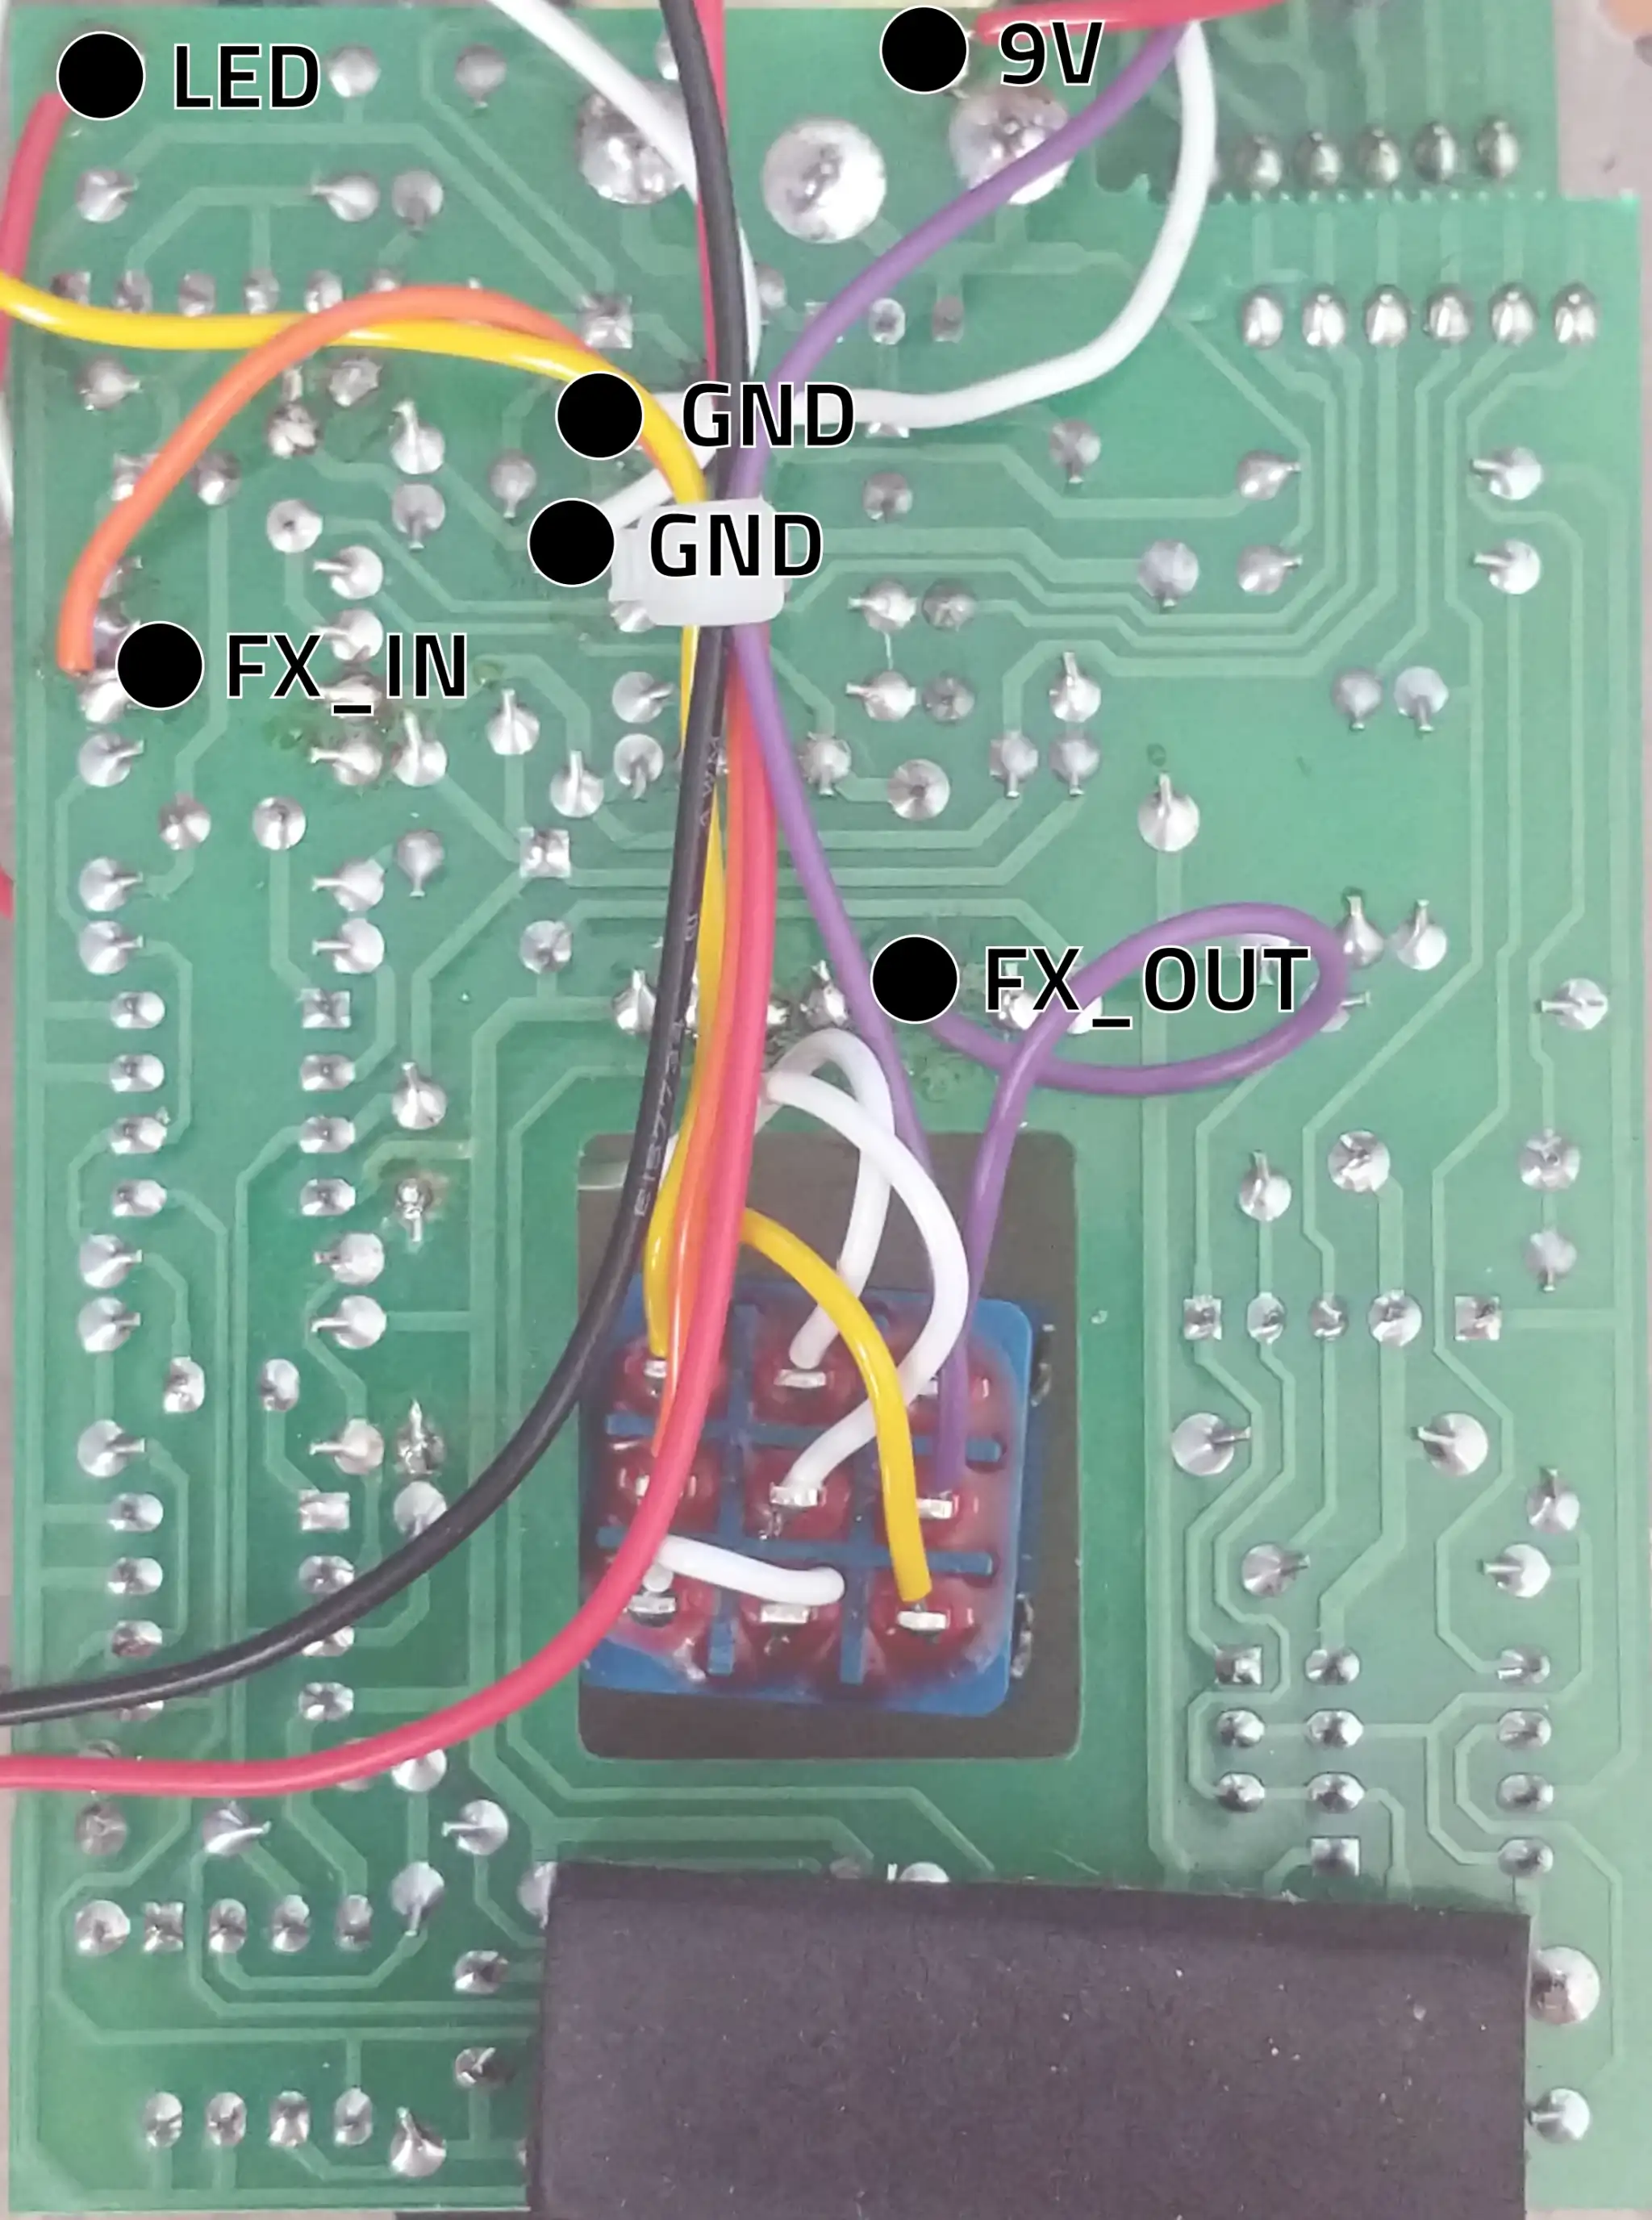 A circuit board with various connection points marked